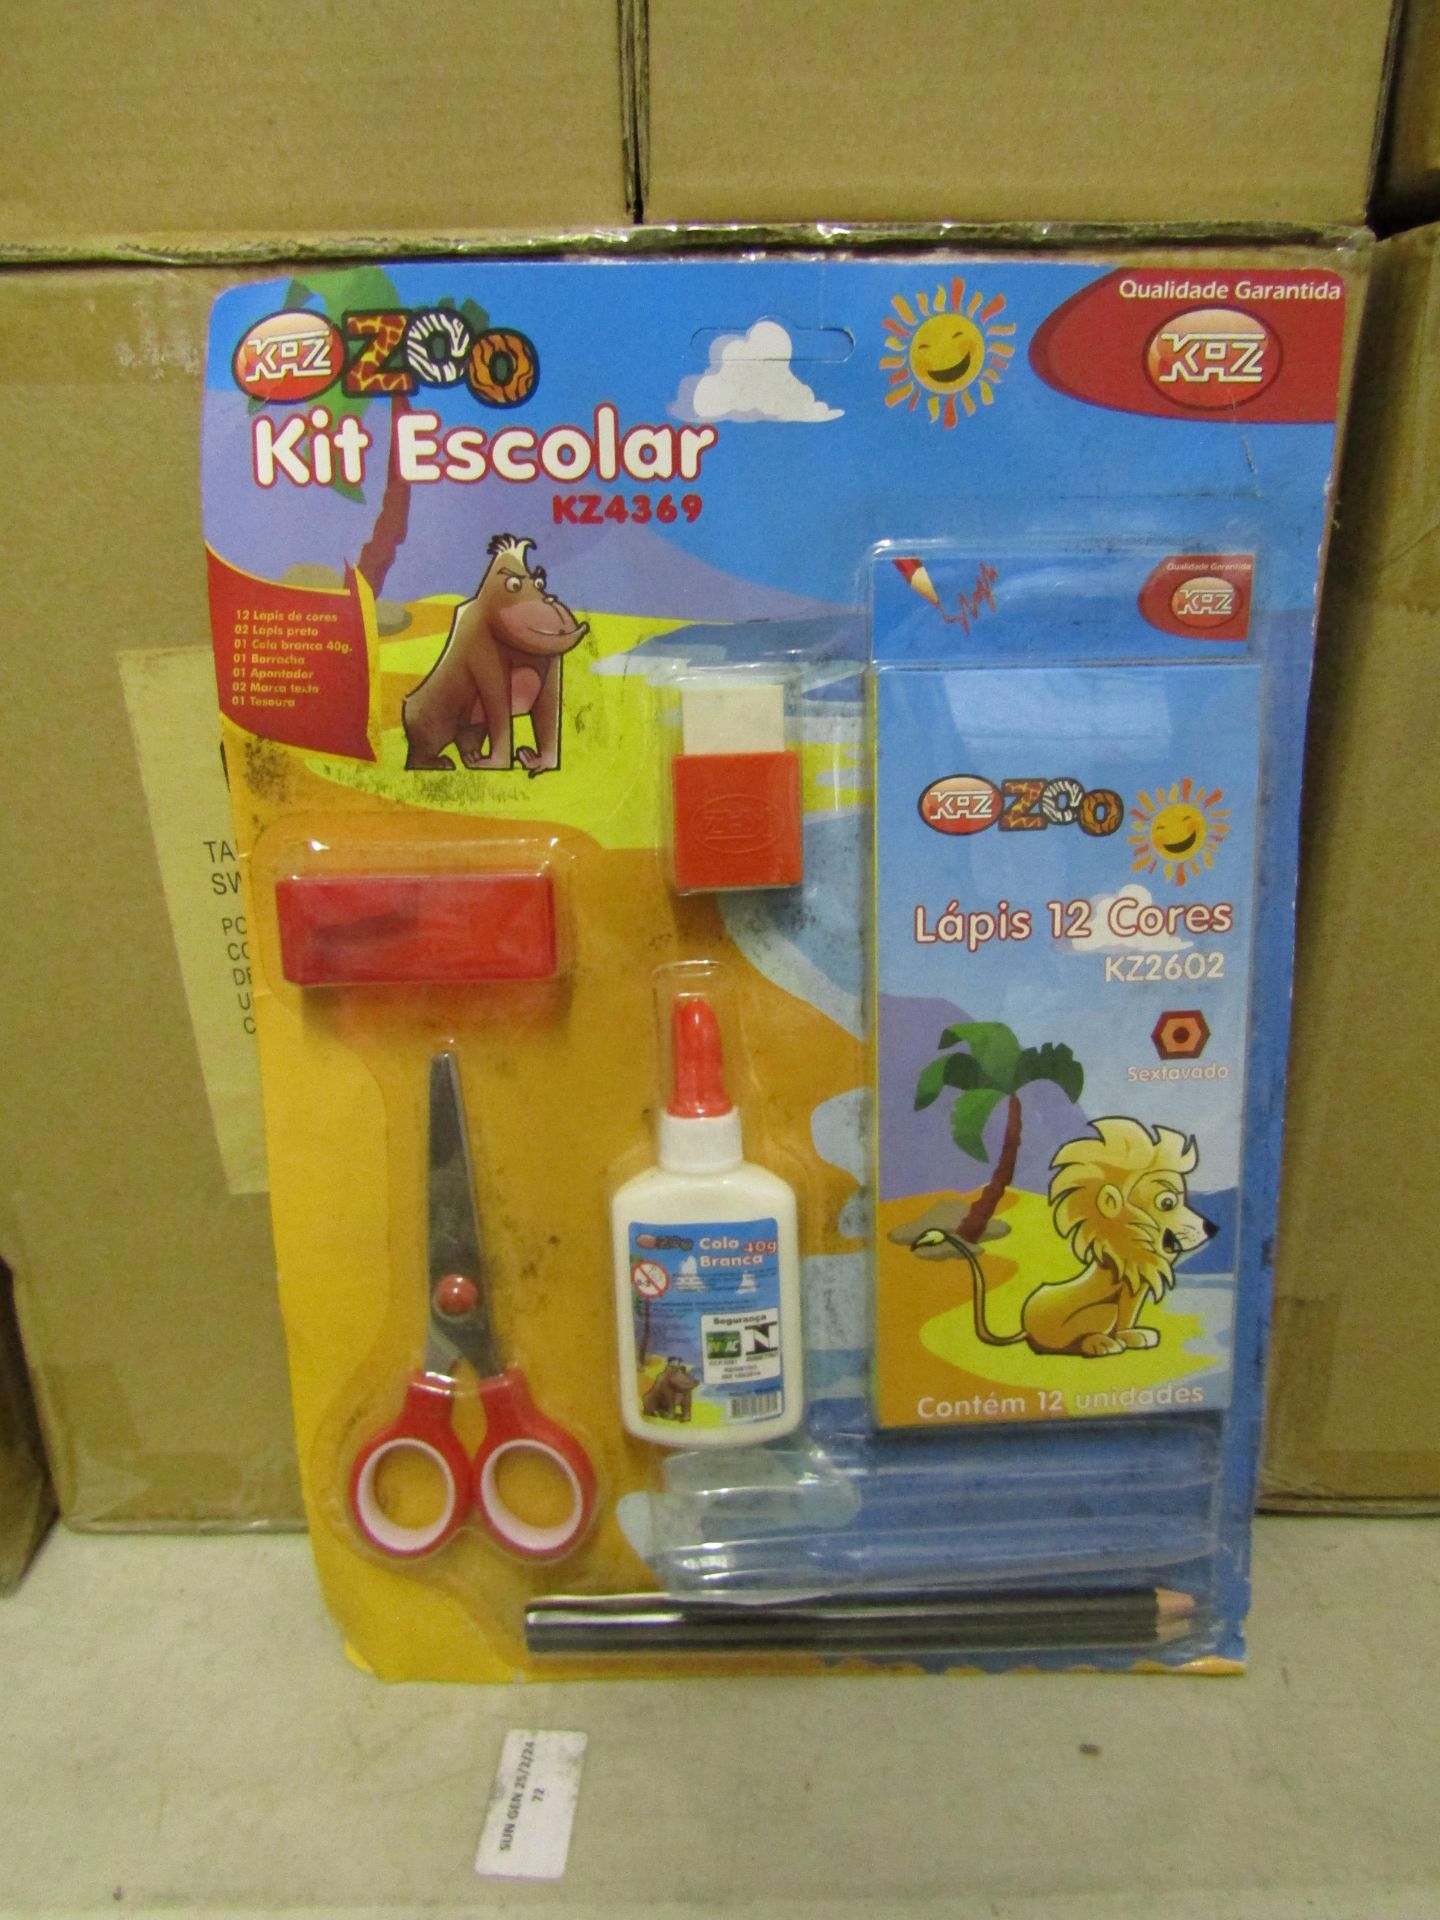 7x Kazoo Kit Escolar, Looks To Be Missing Pens, Unchecked & Packaged.